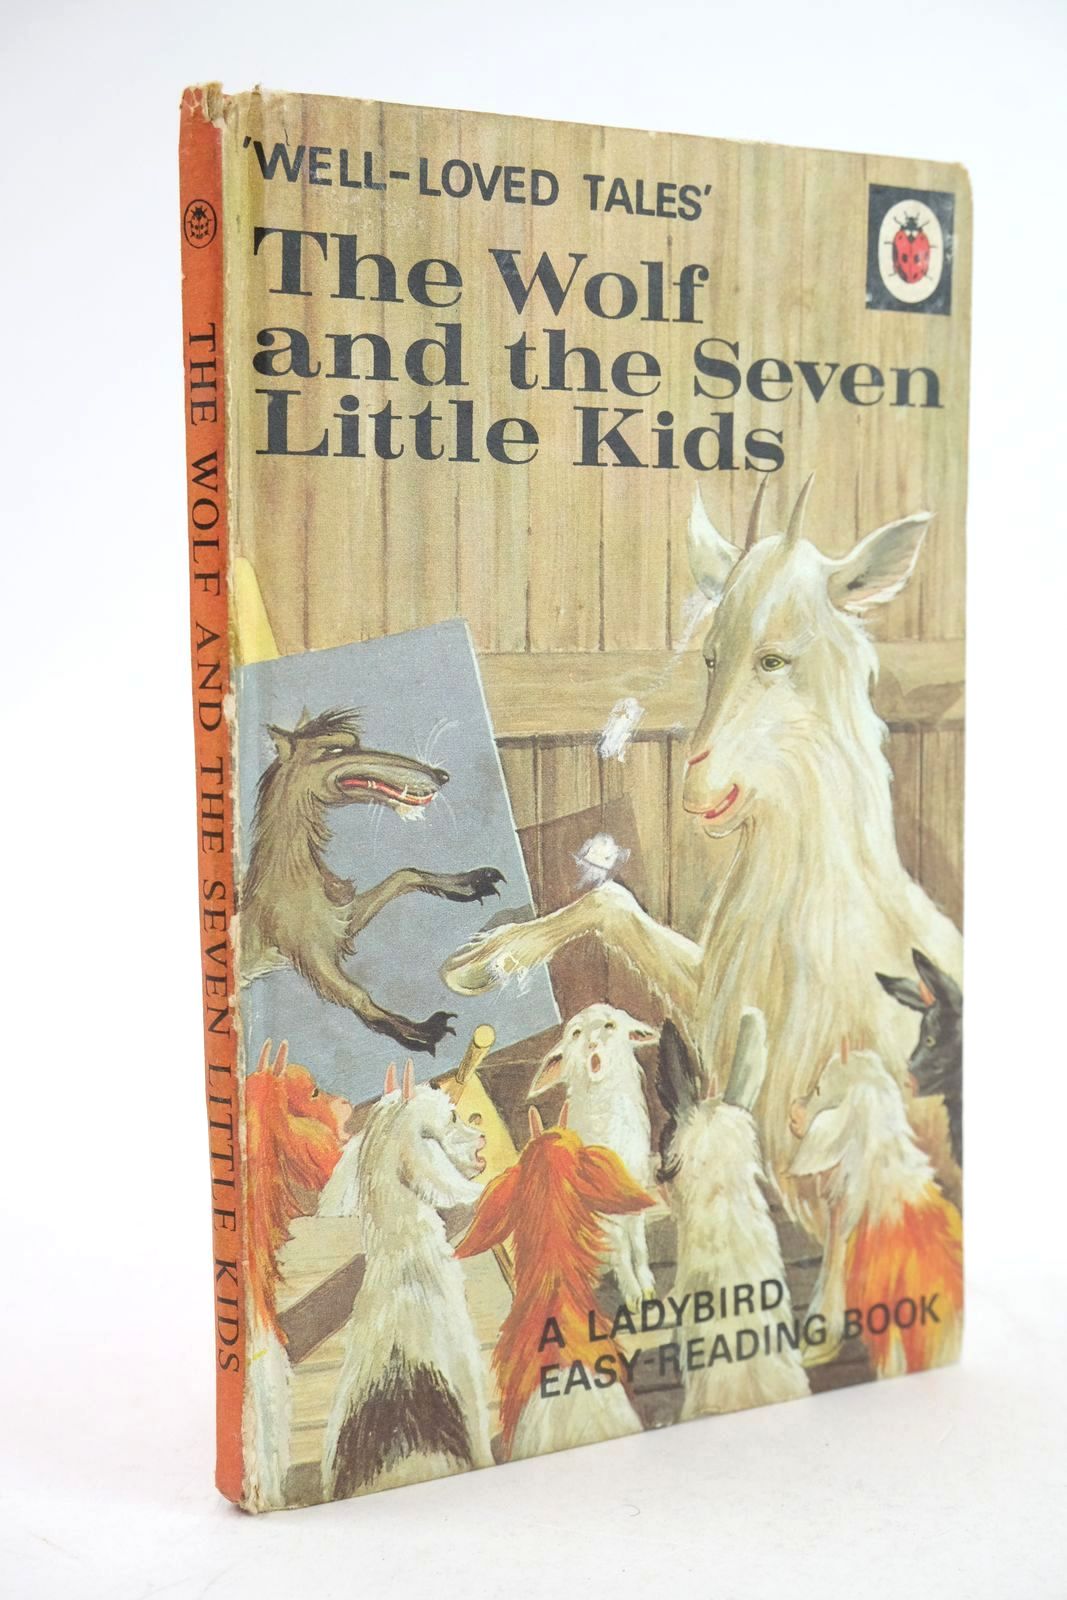 Photo of THE WOLF AND THE SEVEN LITTLE KIDS written by Southgate, Vera illustrated by Lumley, Robert published by Wills & Hepworth Ltd. (STOCK CODE: 1325329)  for sale by Stella & Rose's Books